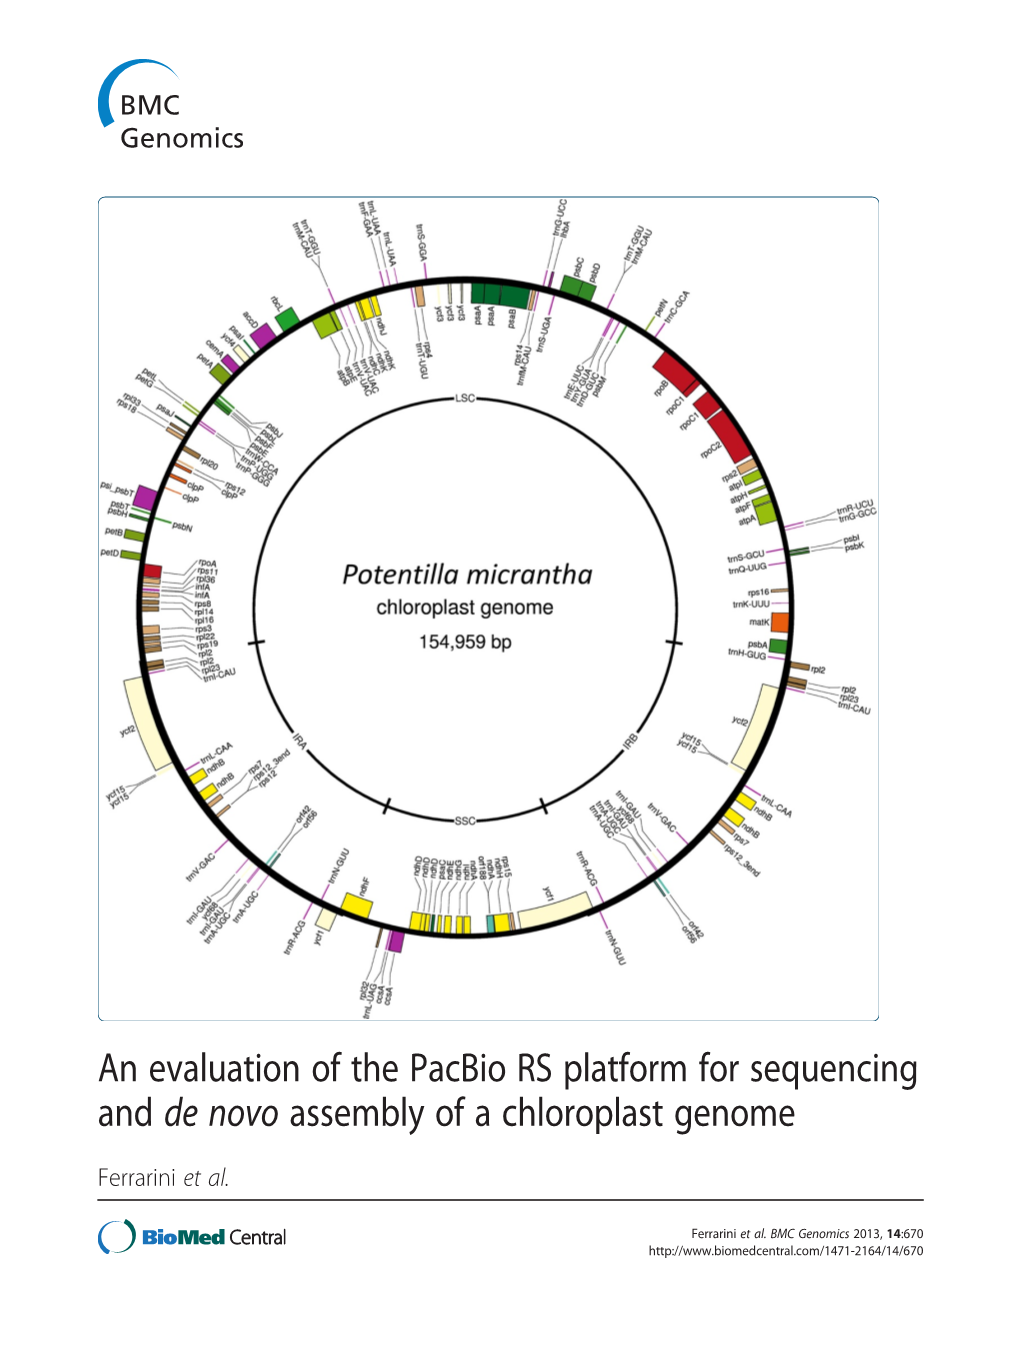 An Evaluation of the Pacbio RS Platform for Sequencing and De Novo Assembly of a Chloroplast Genome